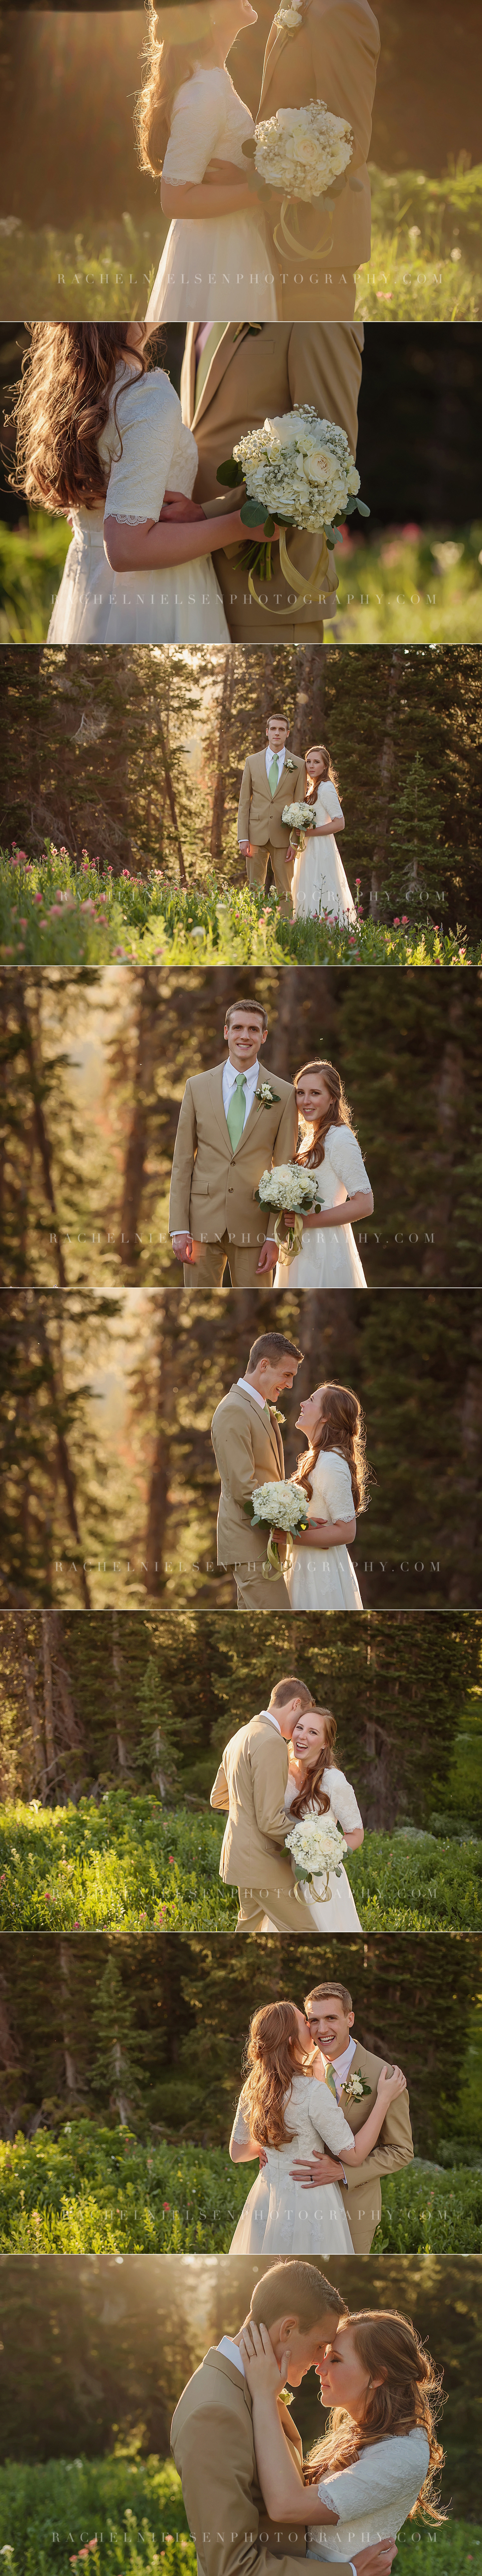 Albion-Basin-Bride-and-Groom-5